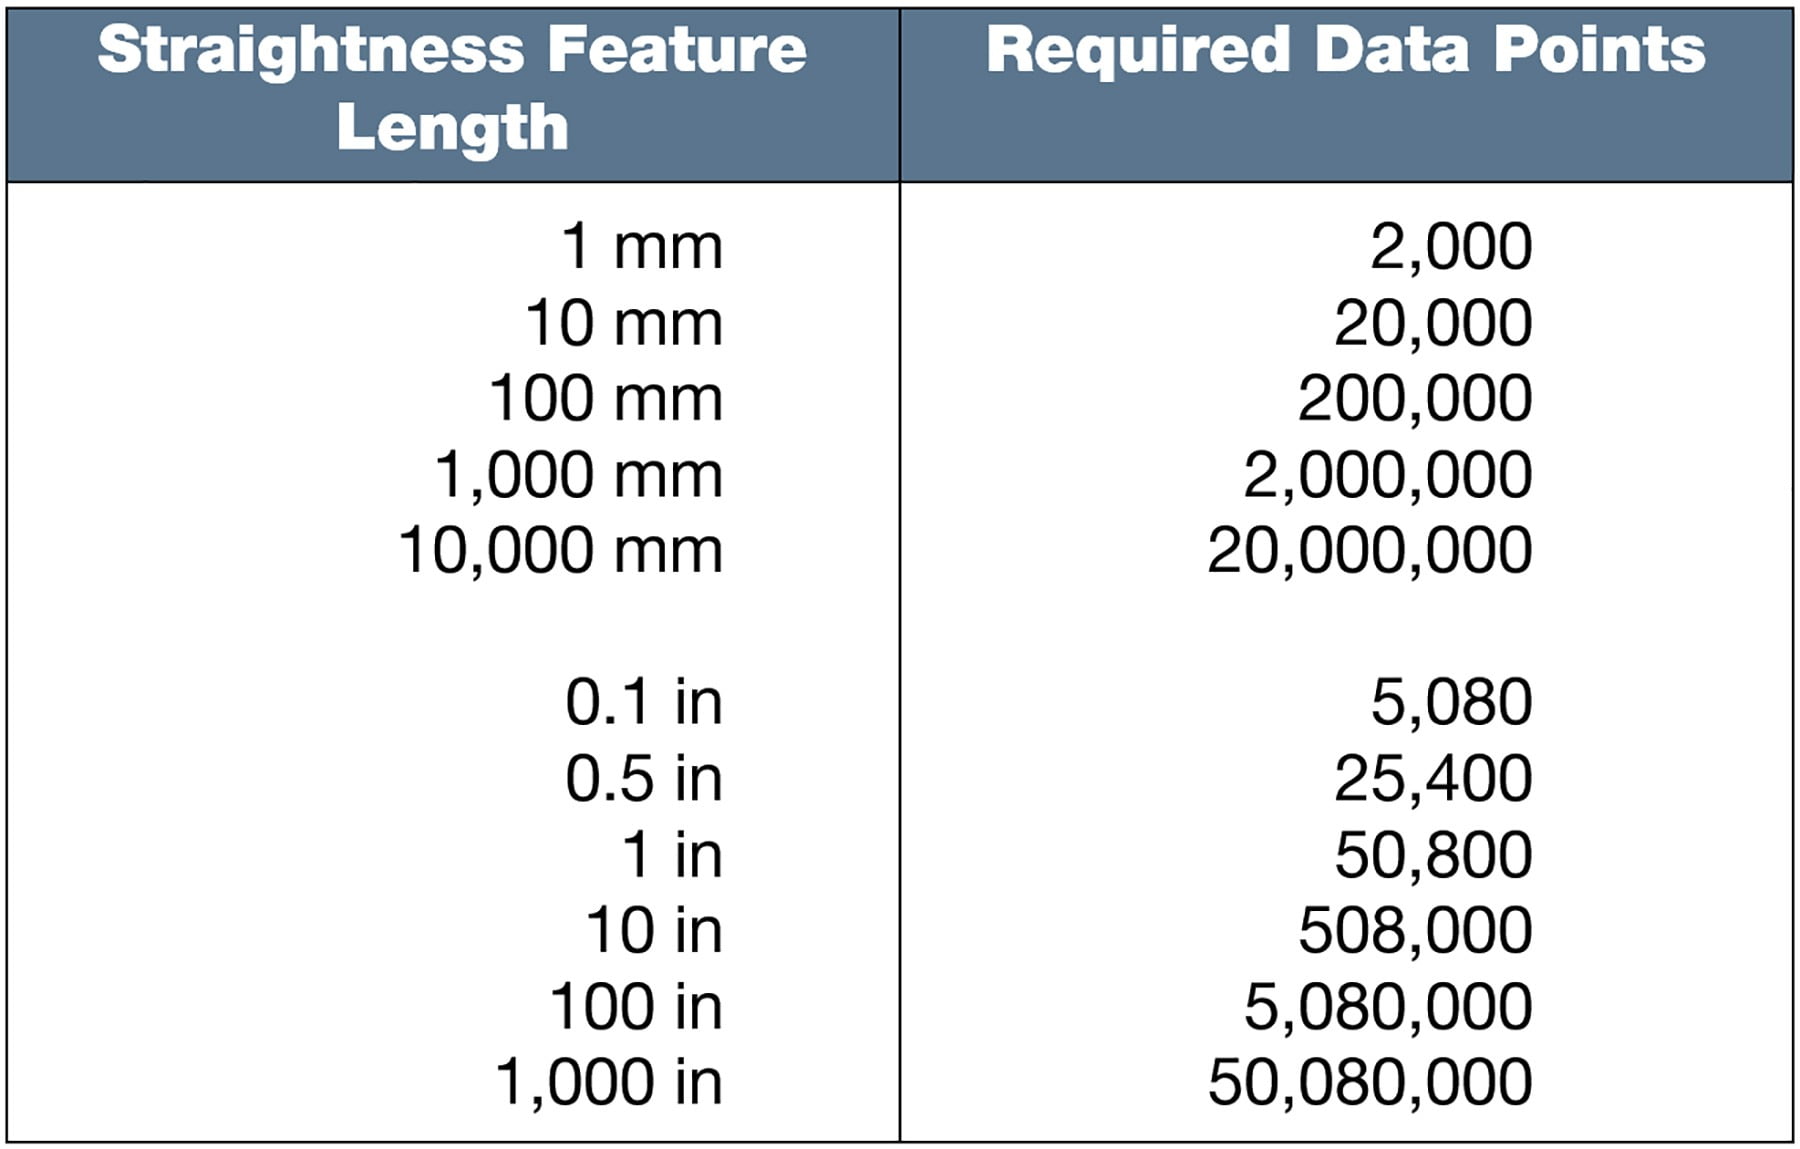 Table 2. Data points required to achieve a 2.5 m short wavelength limit for straightness.